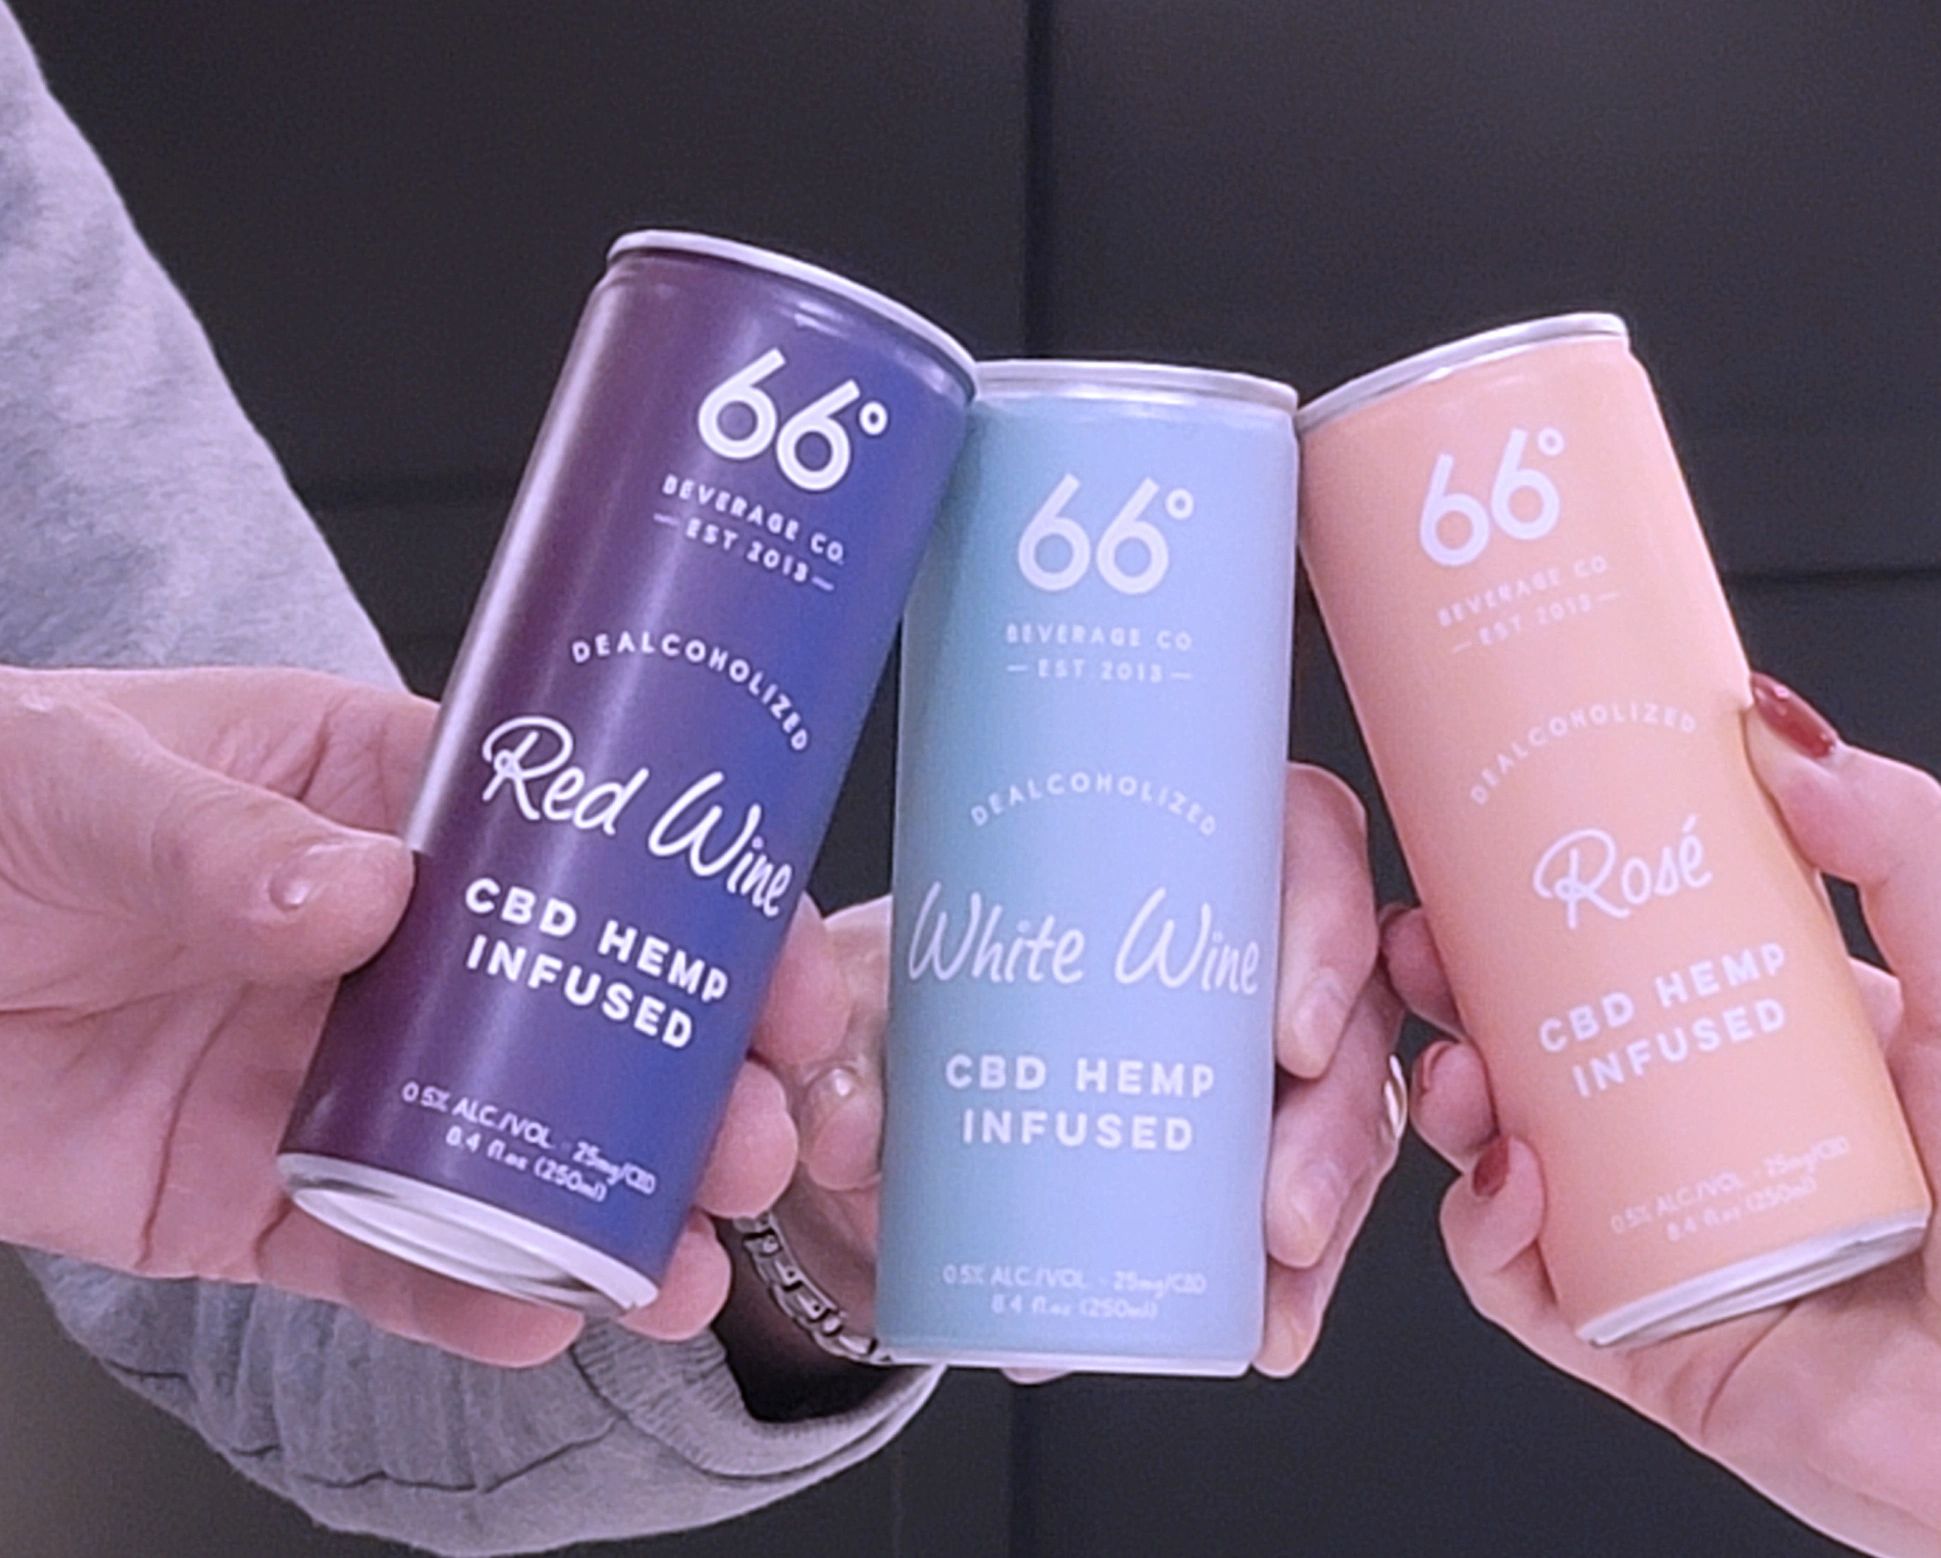 A set of pastel-colored cans